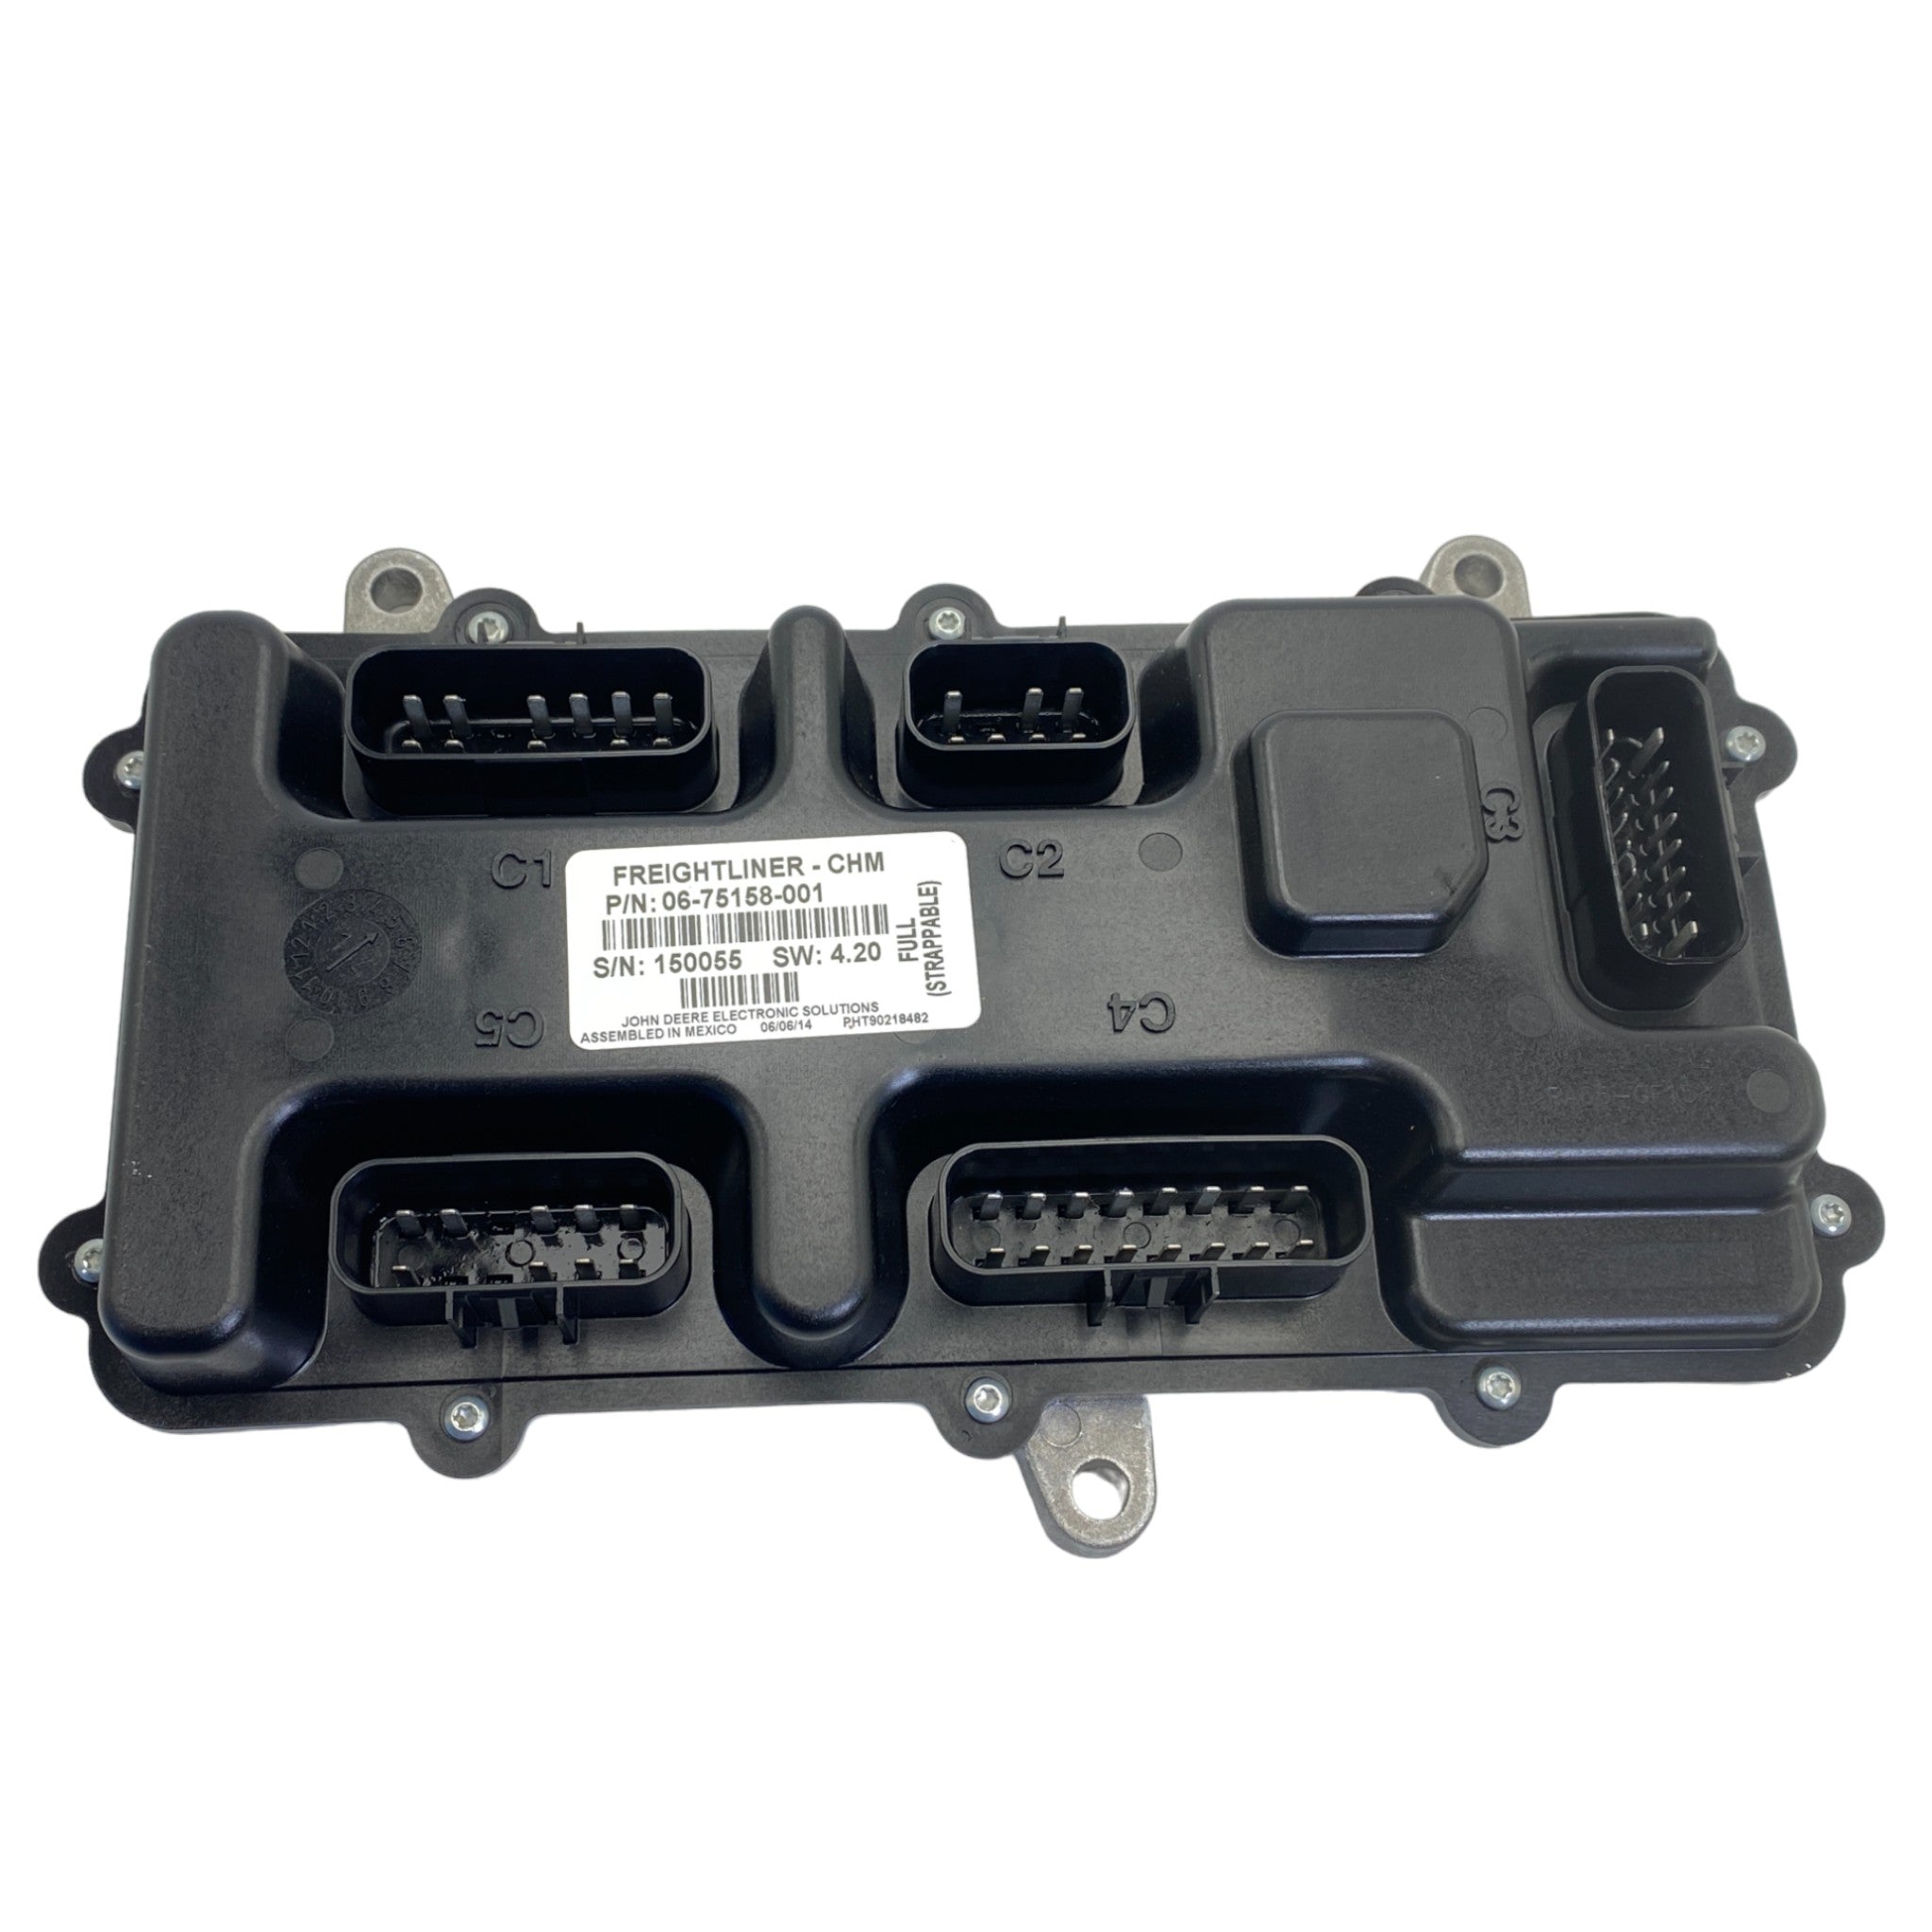 A66-19809-000 Genuine Freightliner Chm Bcm Module For M2 Business Class